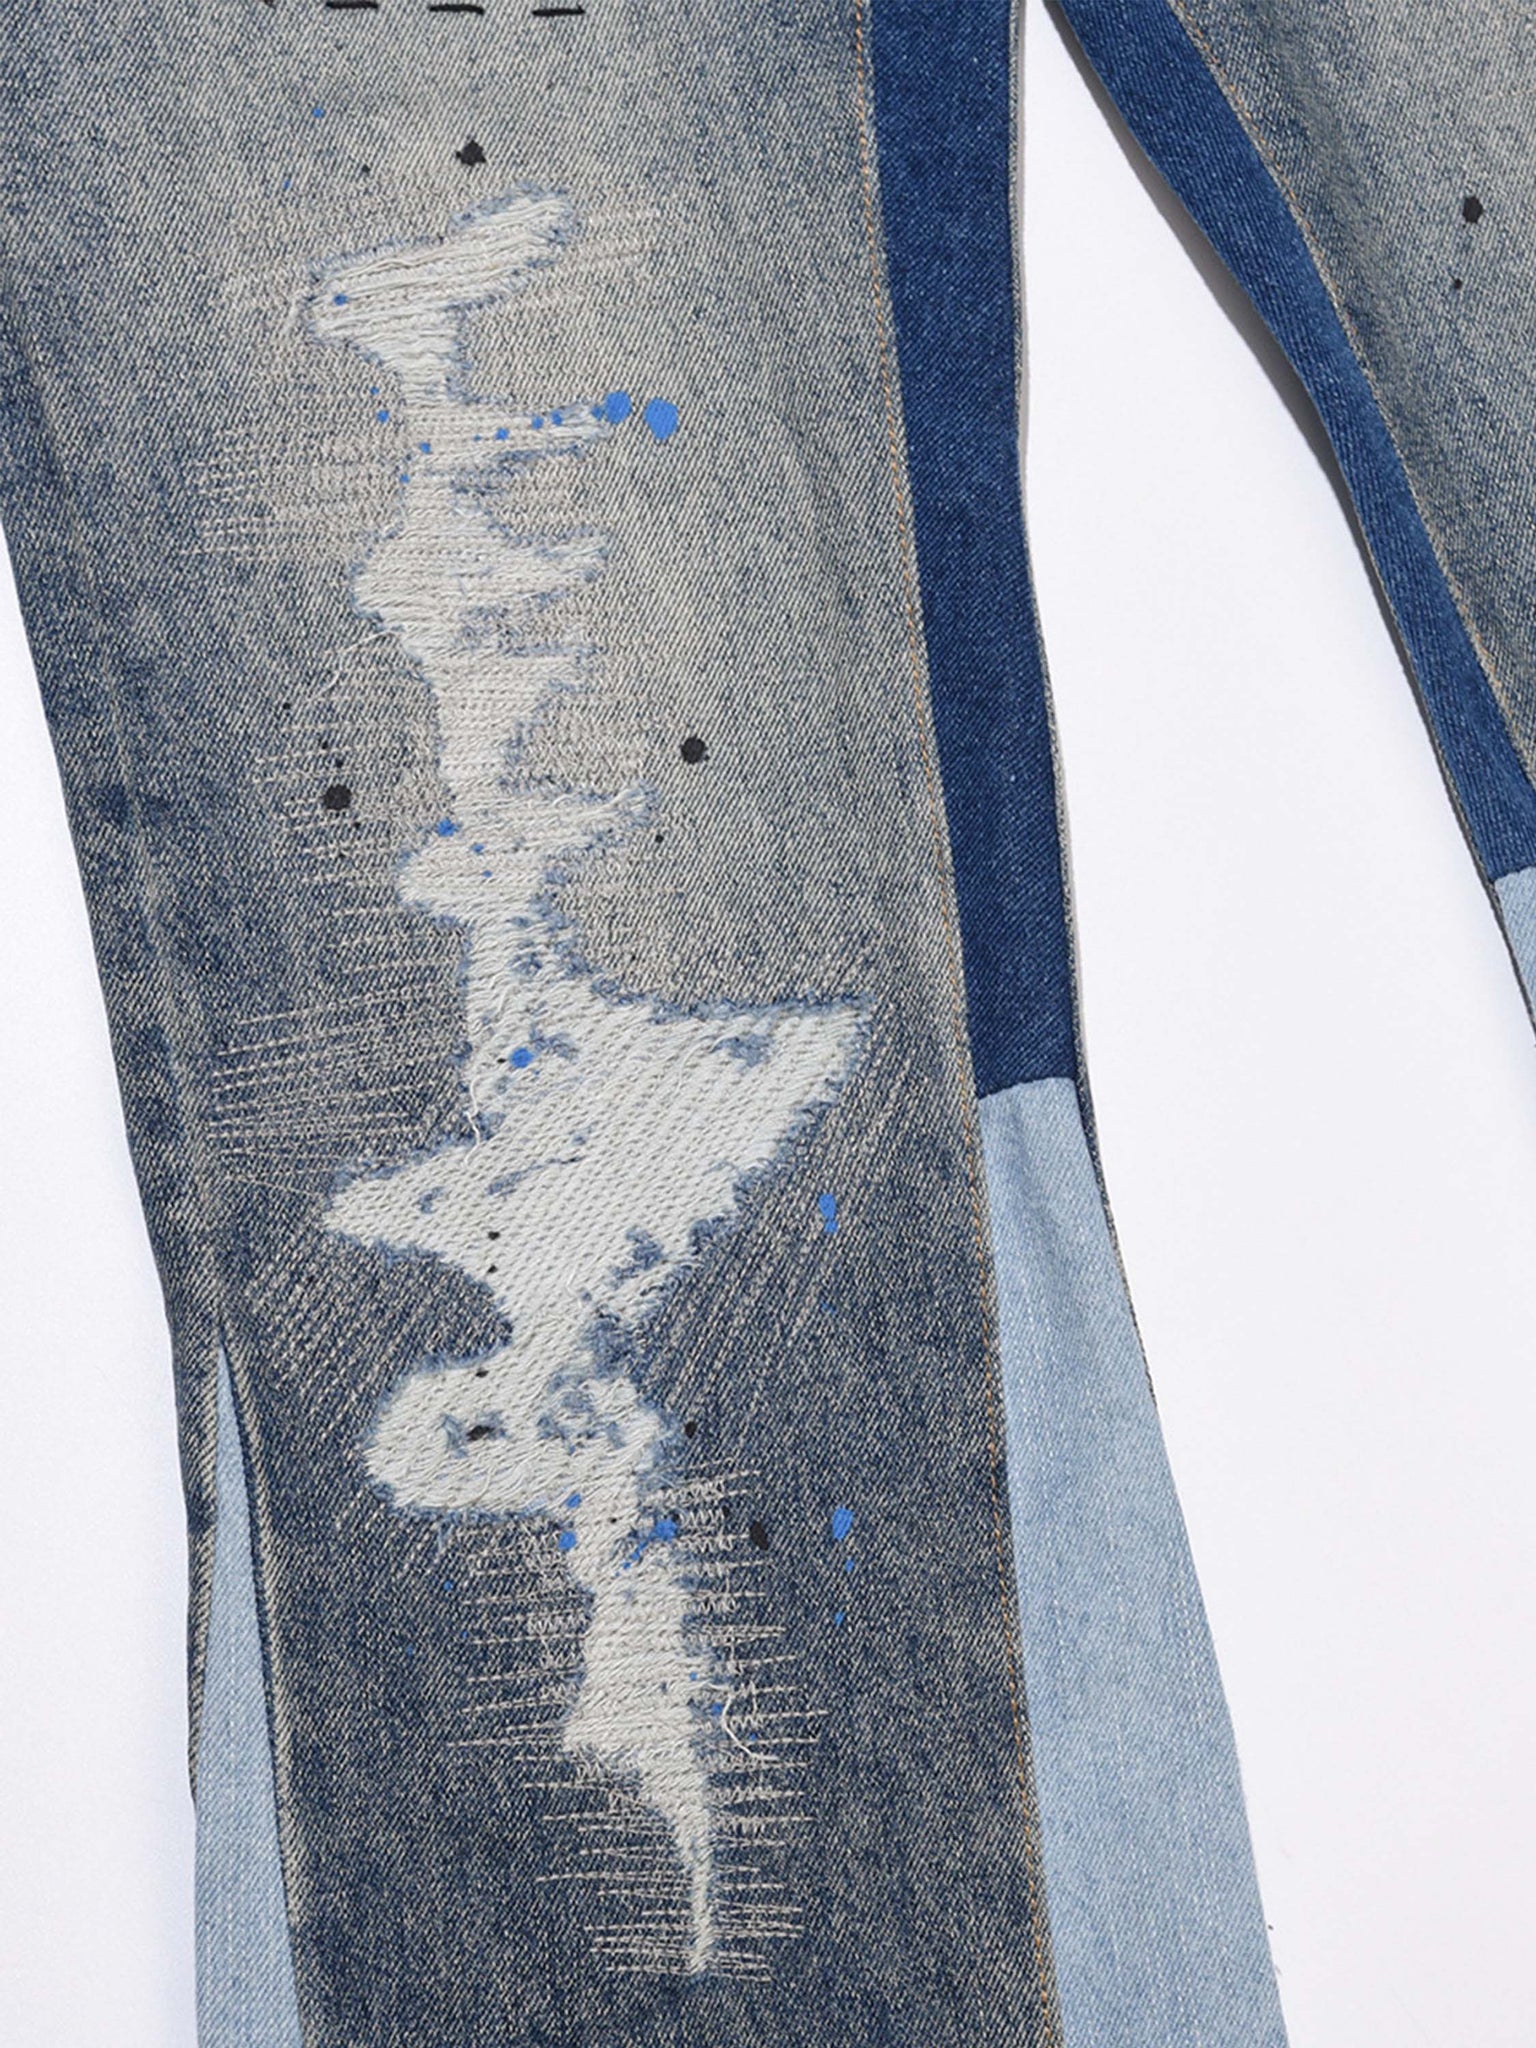 The Supermade Splashing Ink Patchwork Jeans